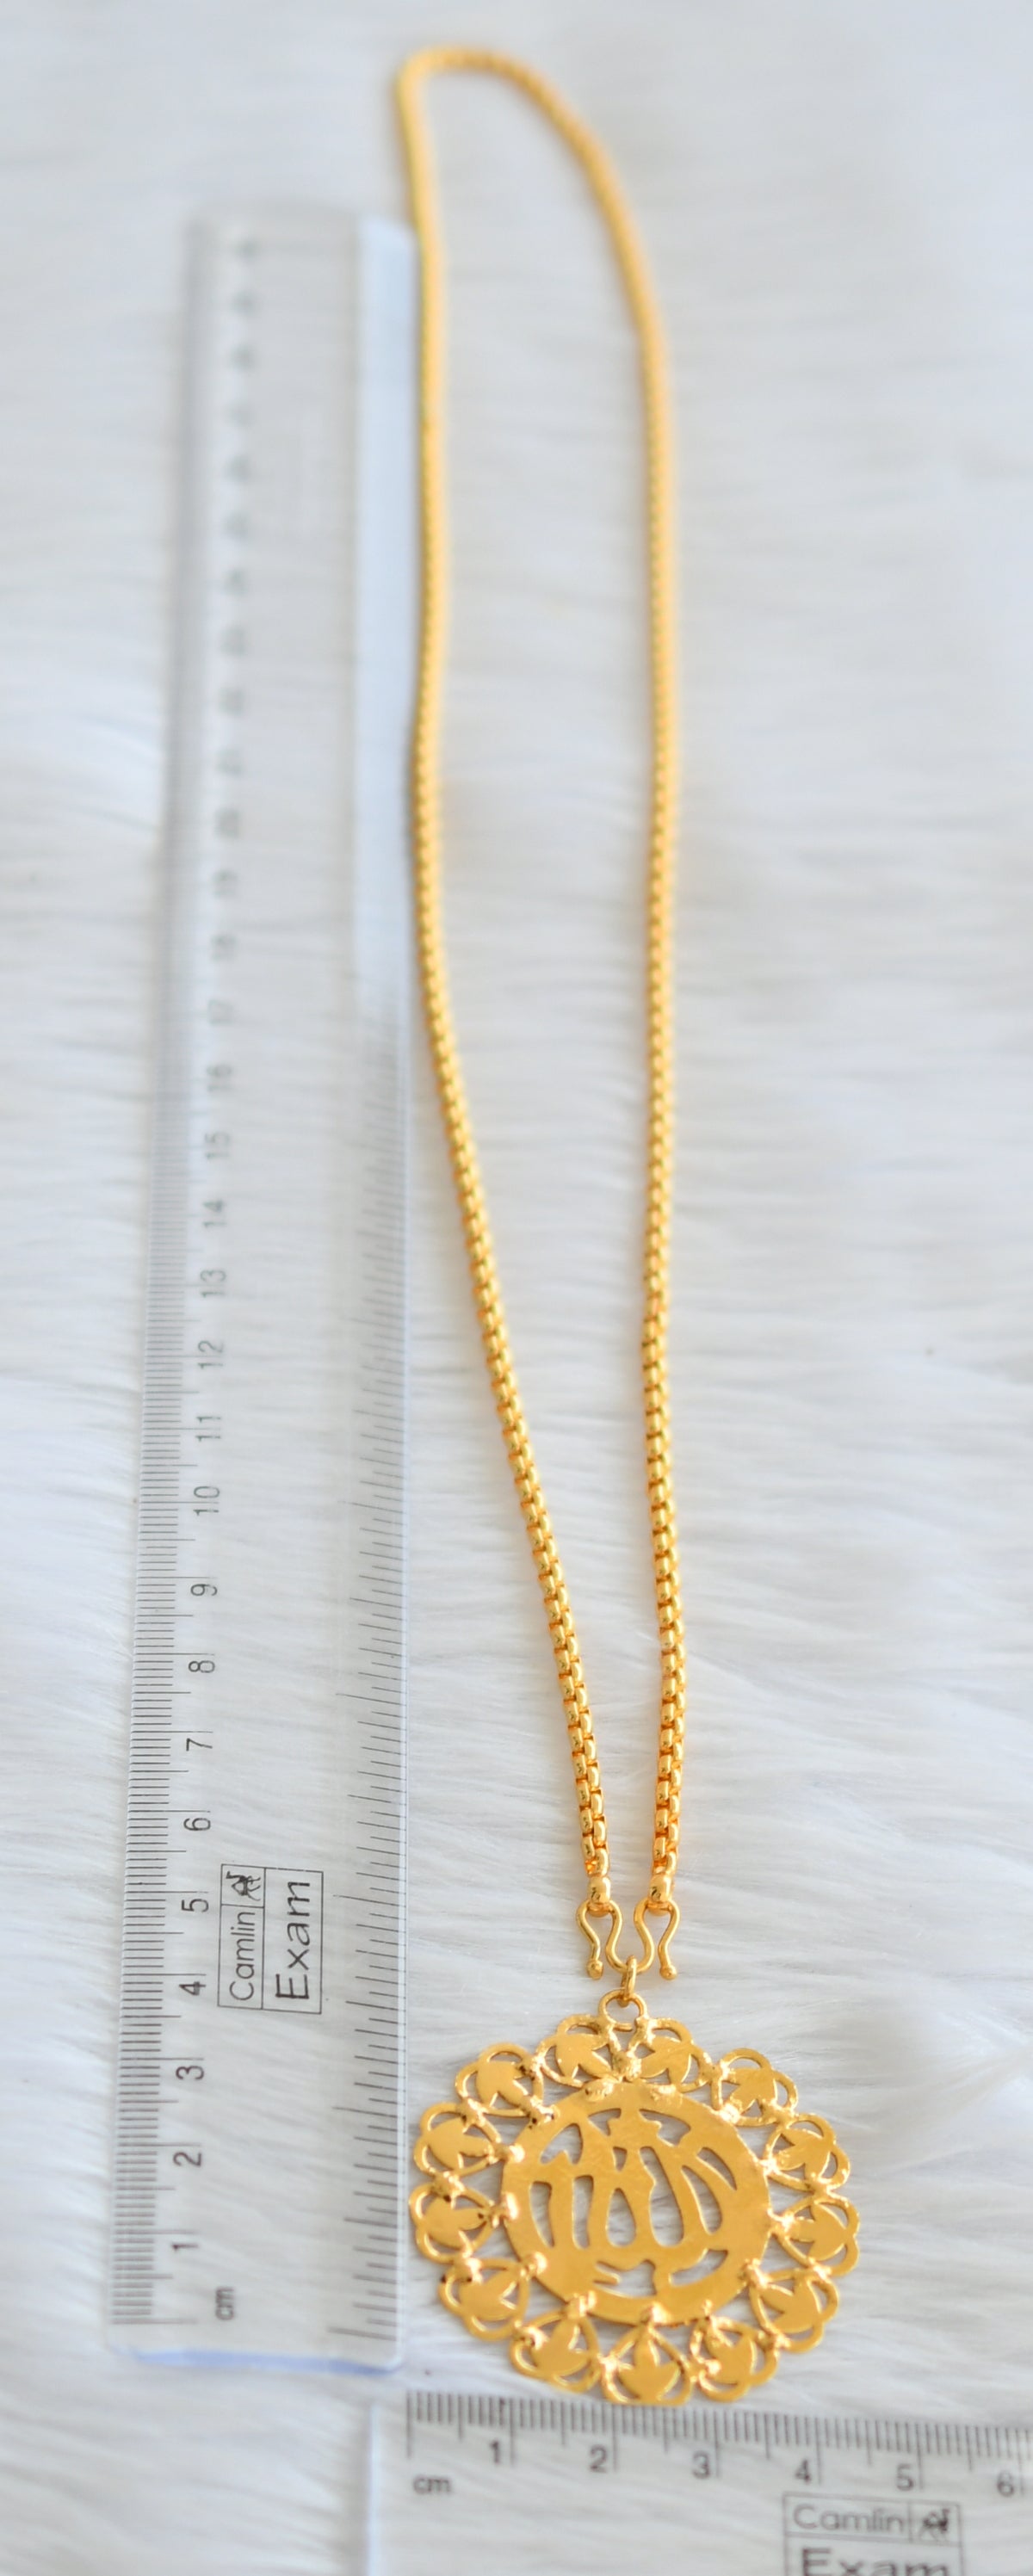 Gold tone 24 inches chain with round heart pendant dj-43980